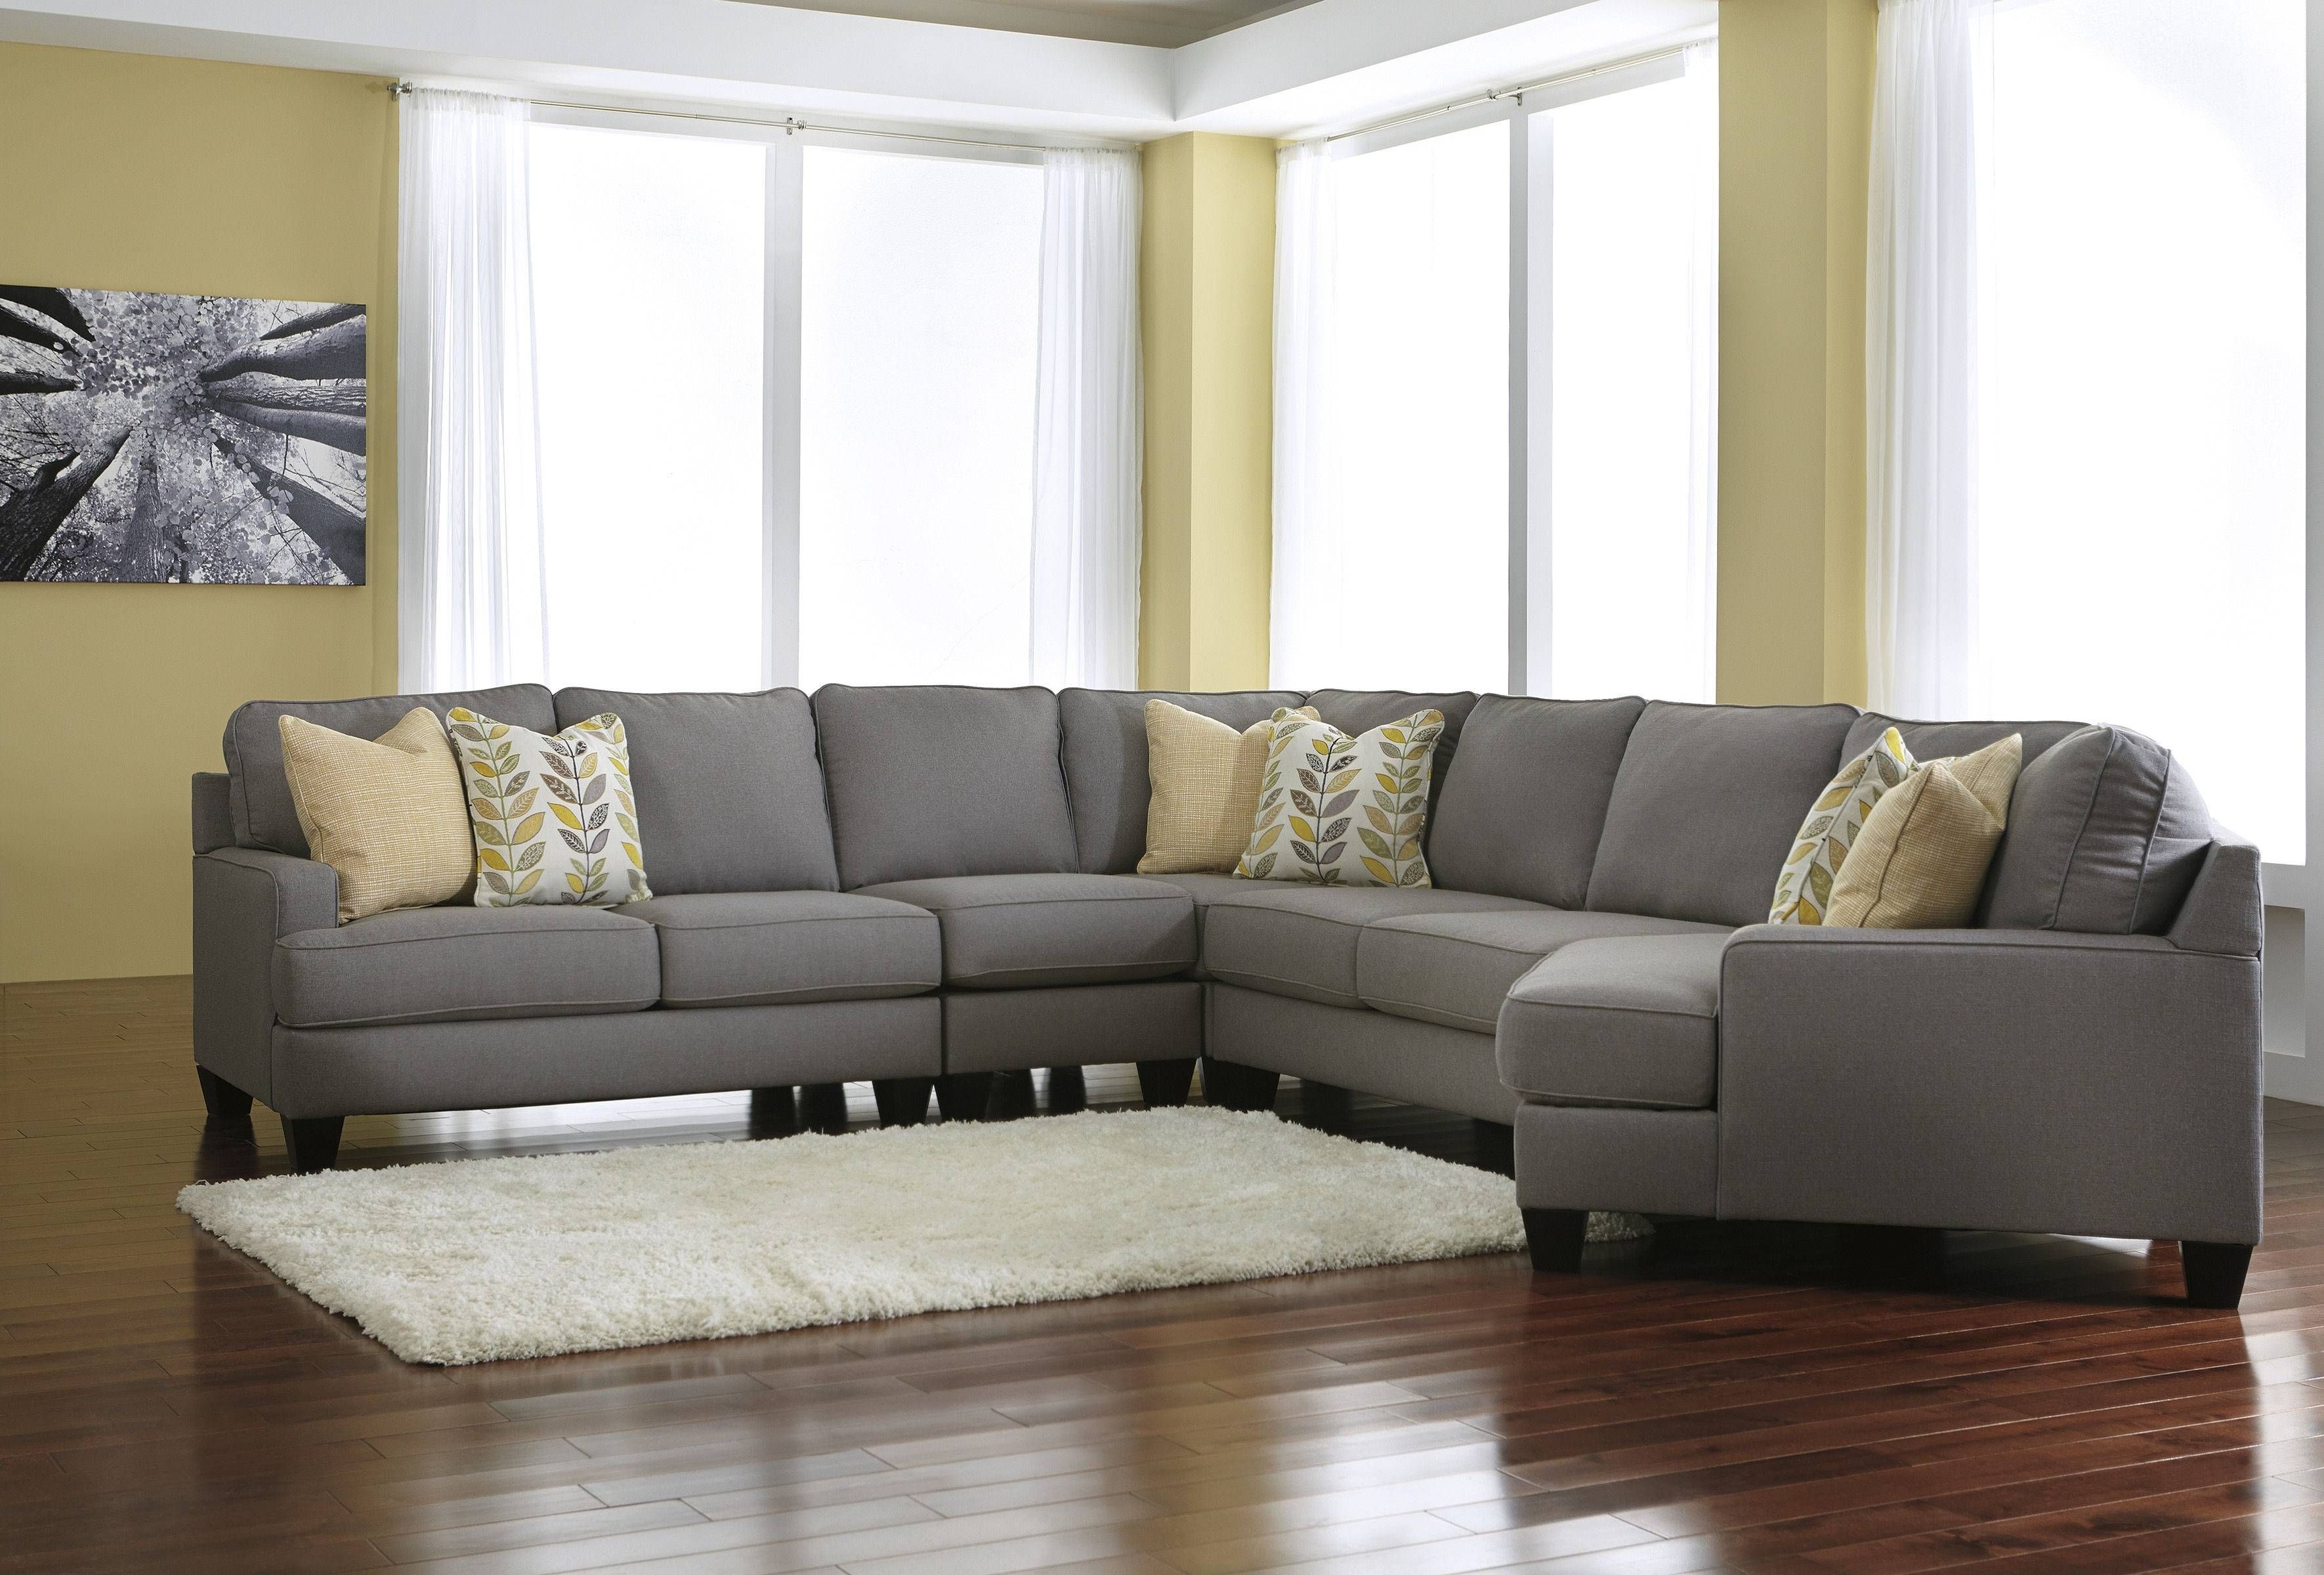 Chamberly – Alloy Contemporary Wood Fabric Raf Cuddler 5pc Inside Cuddler Sectional Sofa (View 30 of 30)